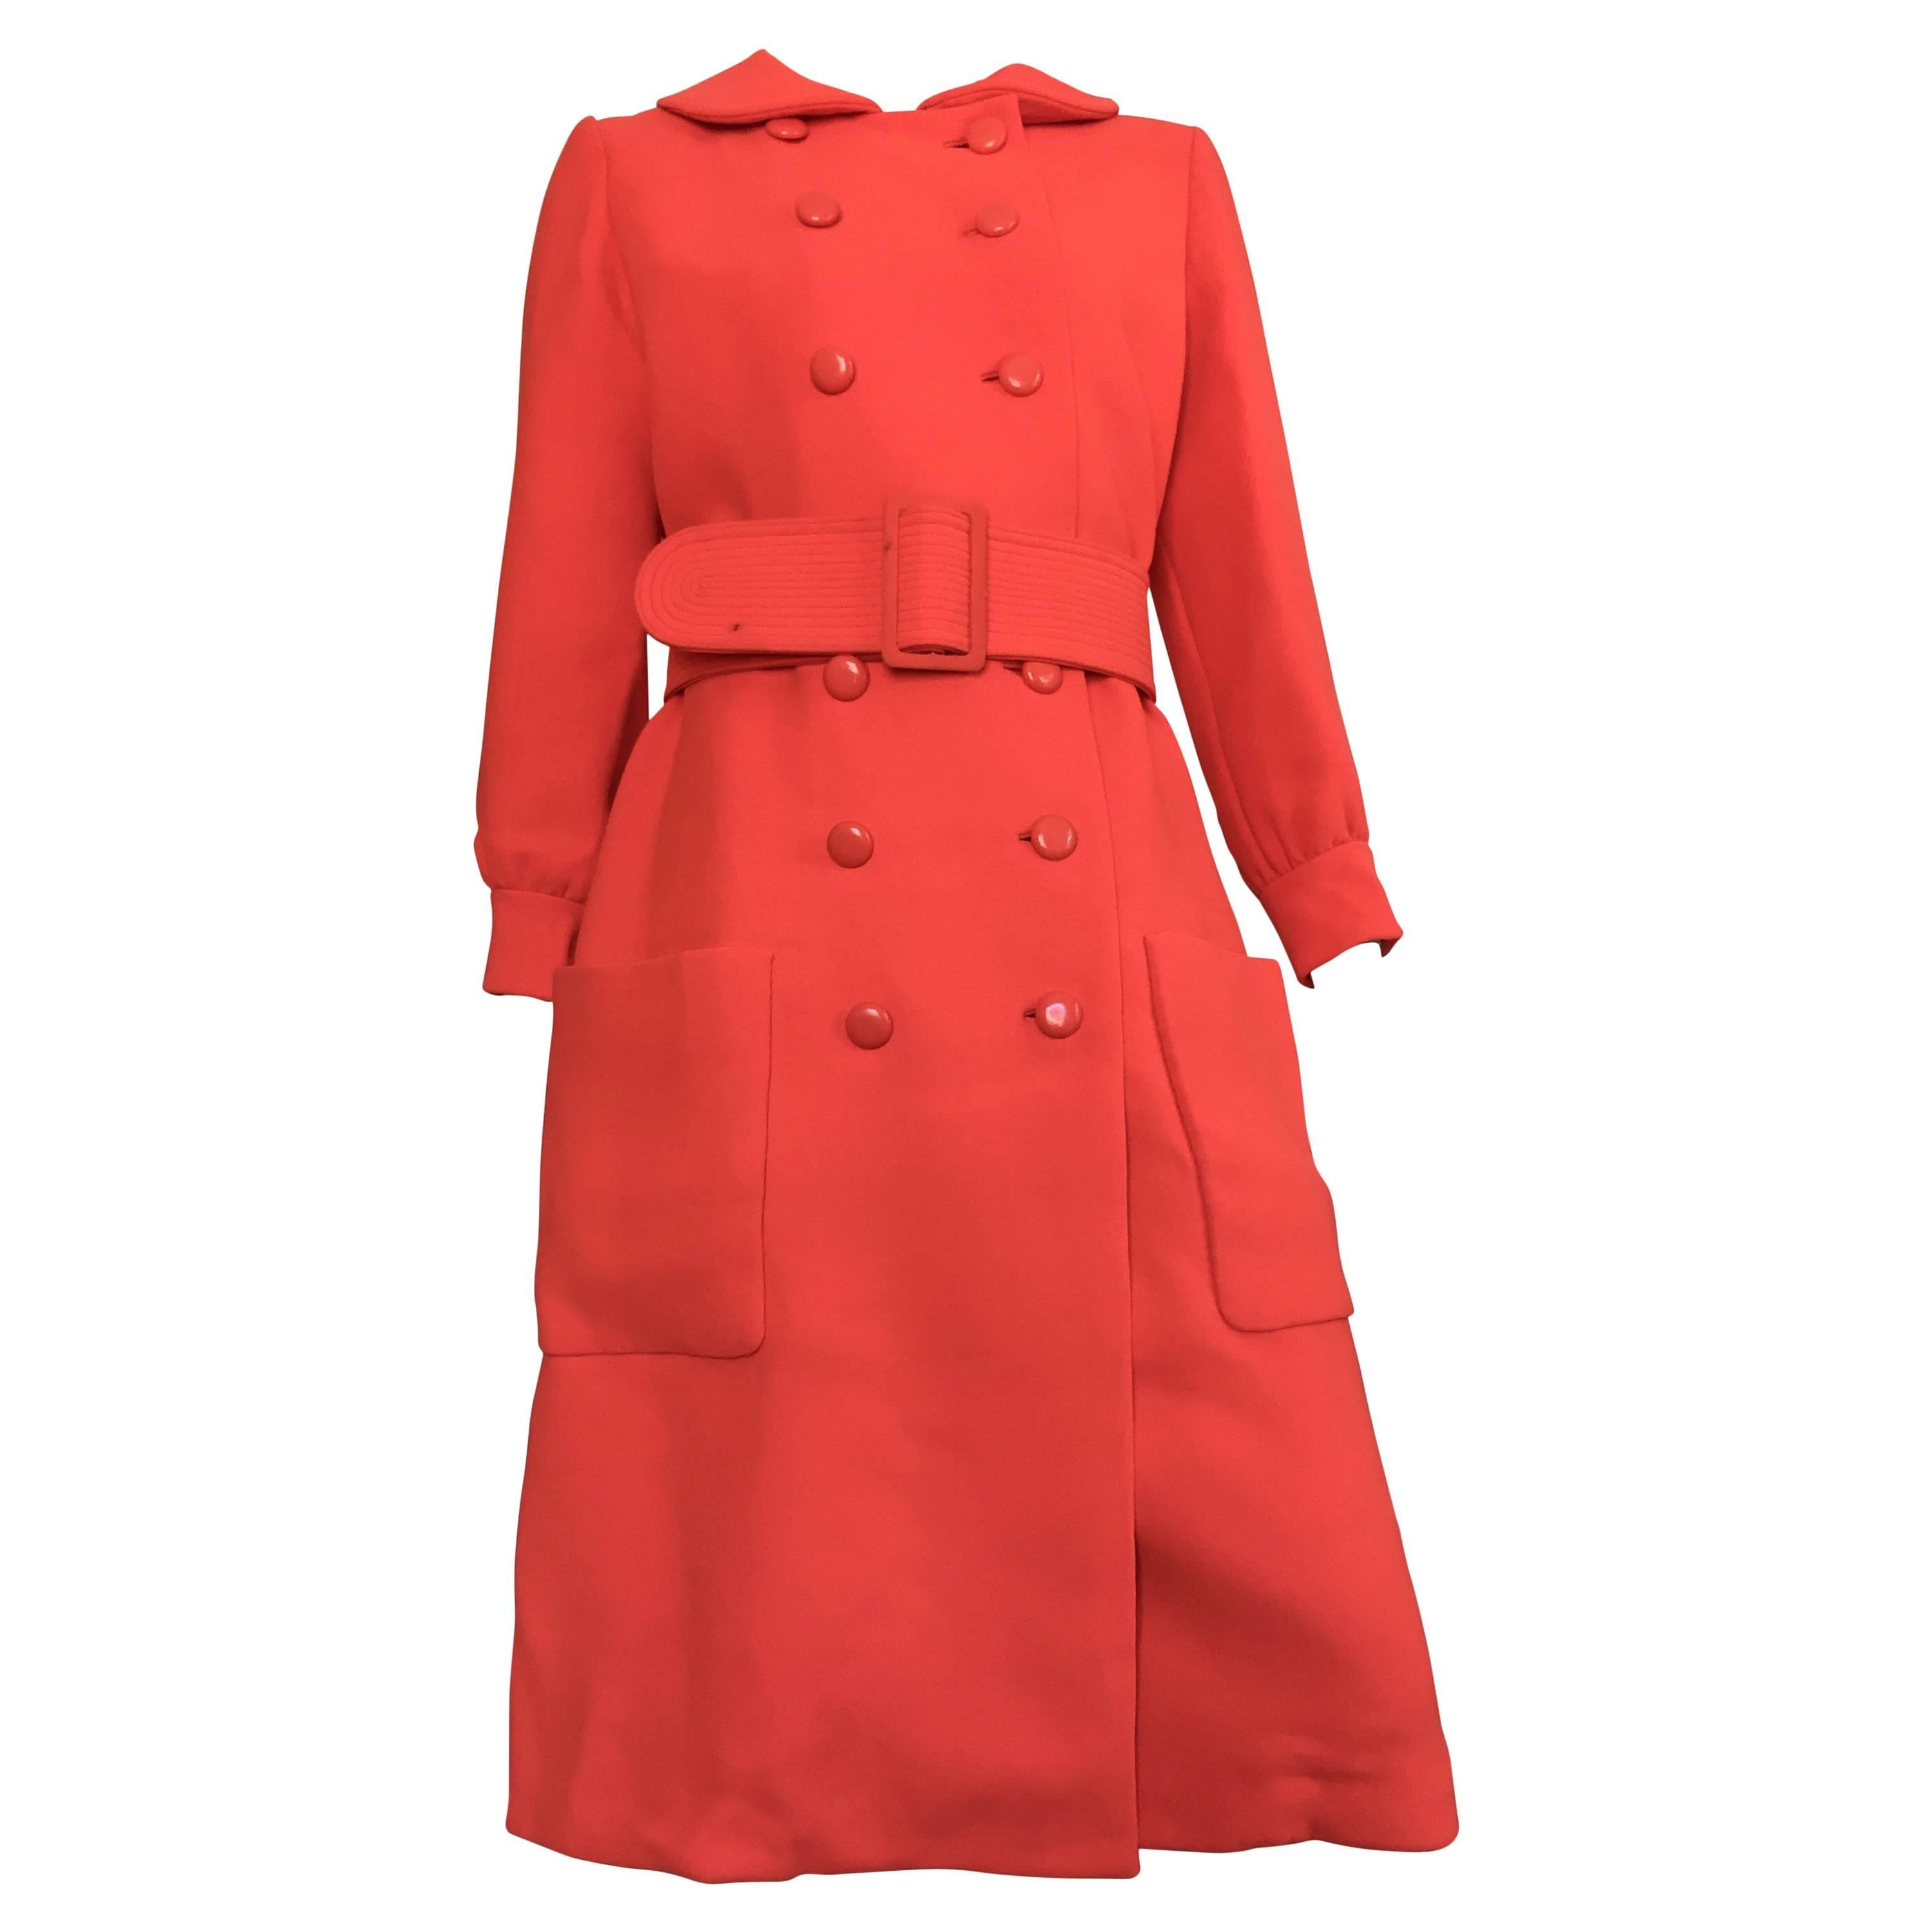 Norman Norell 60s orange wool coat with belt size 6 / 8. For Sale